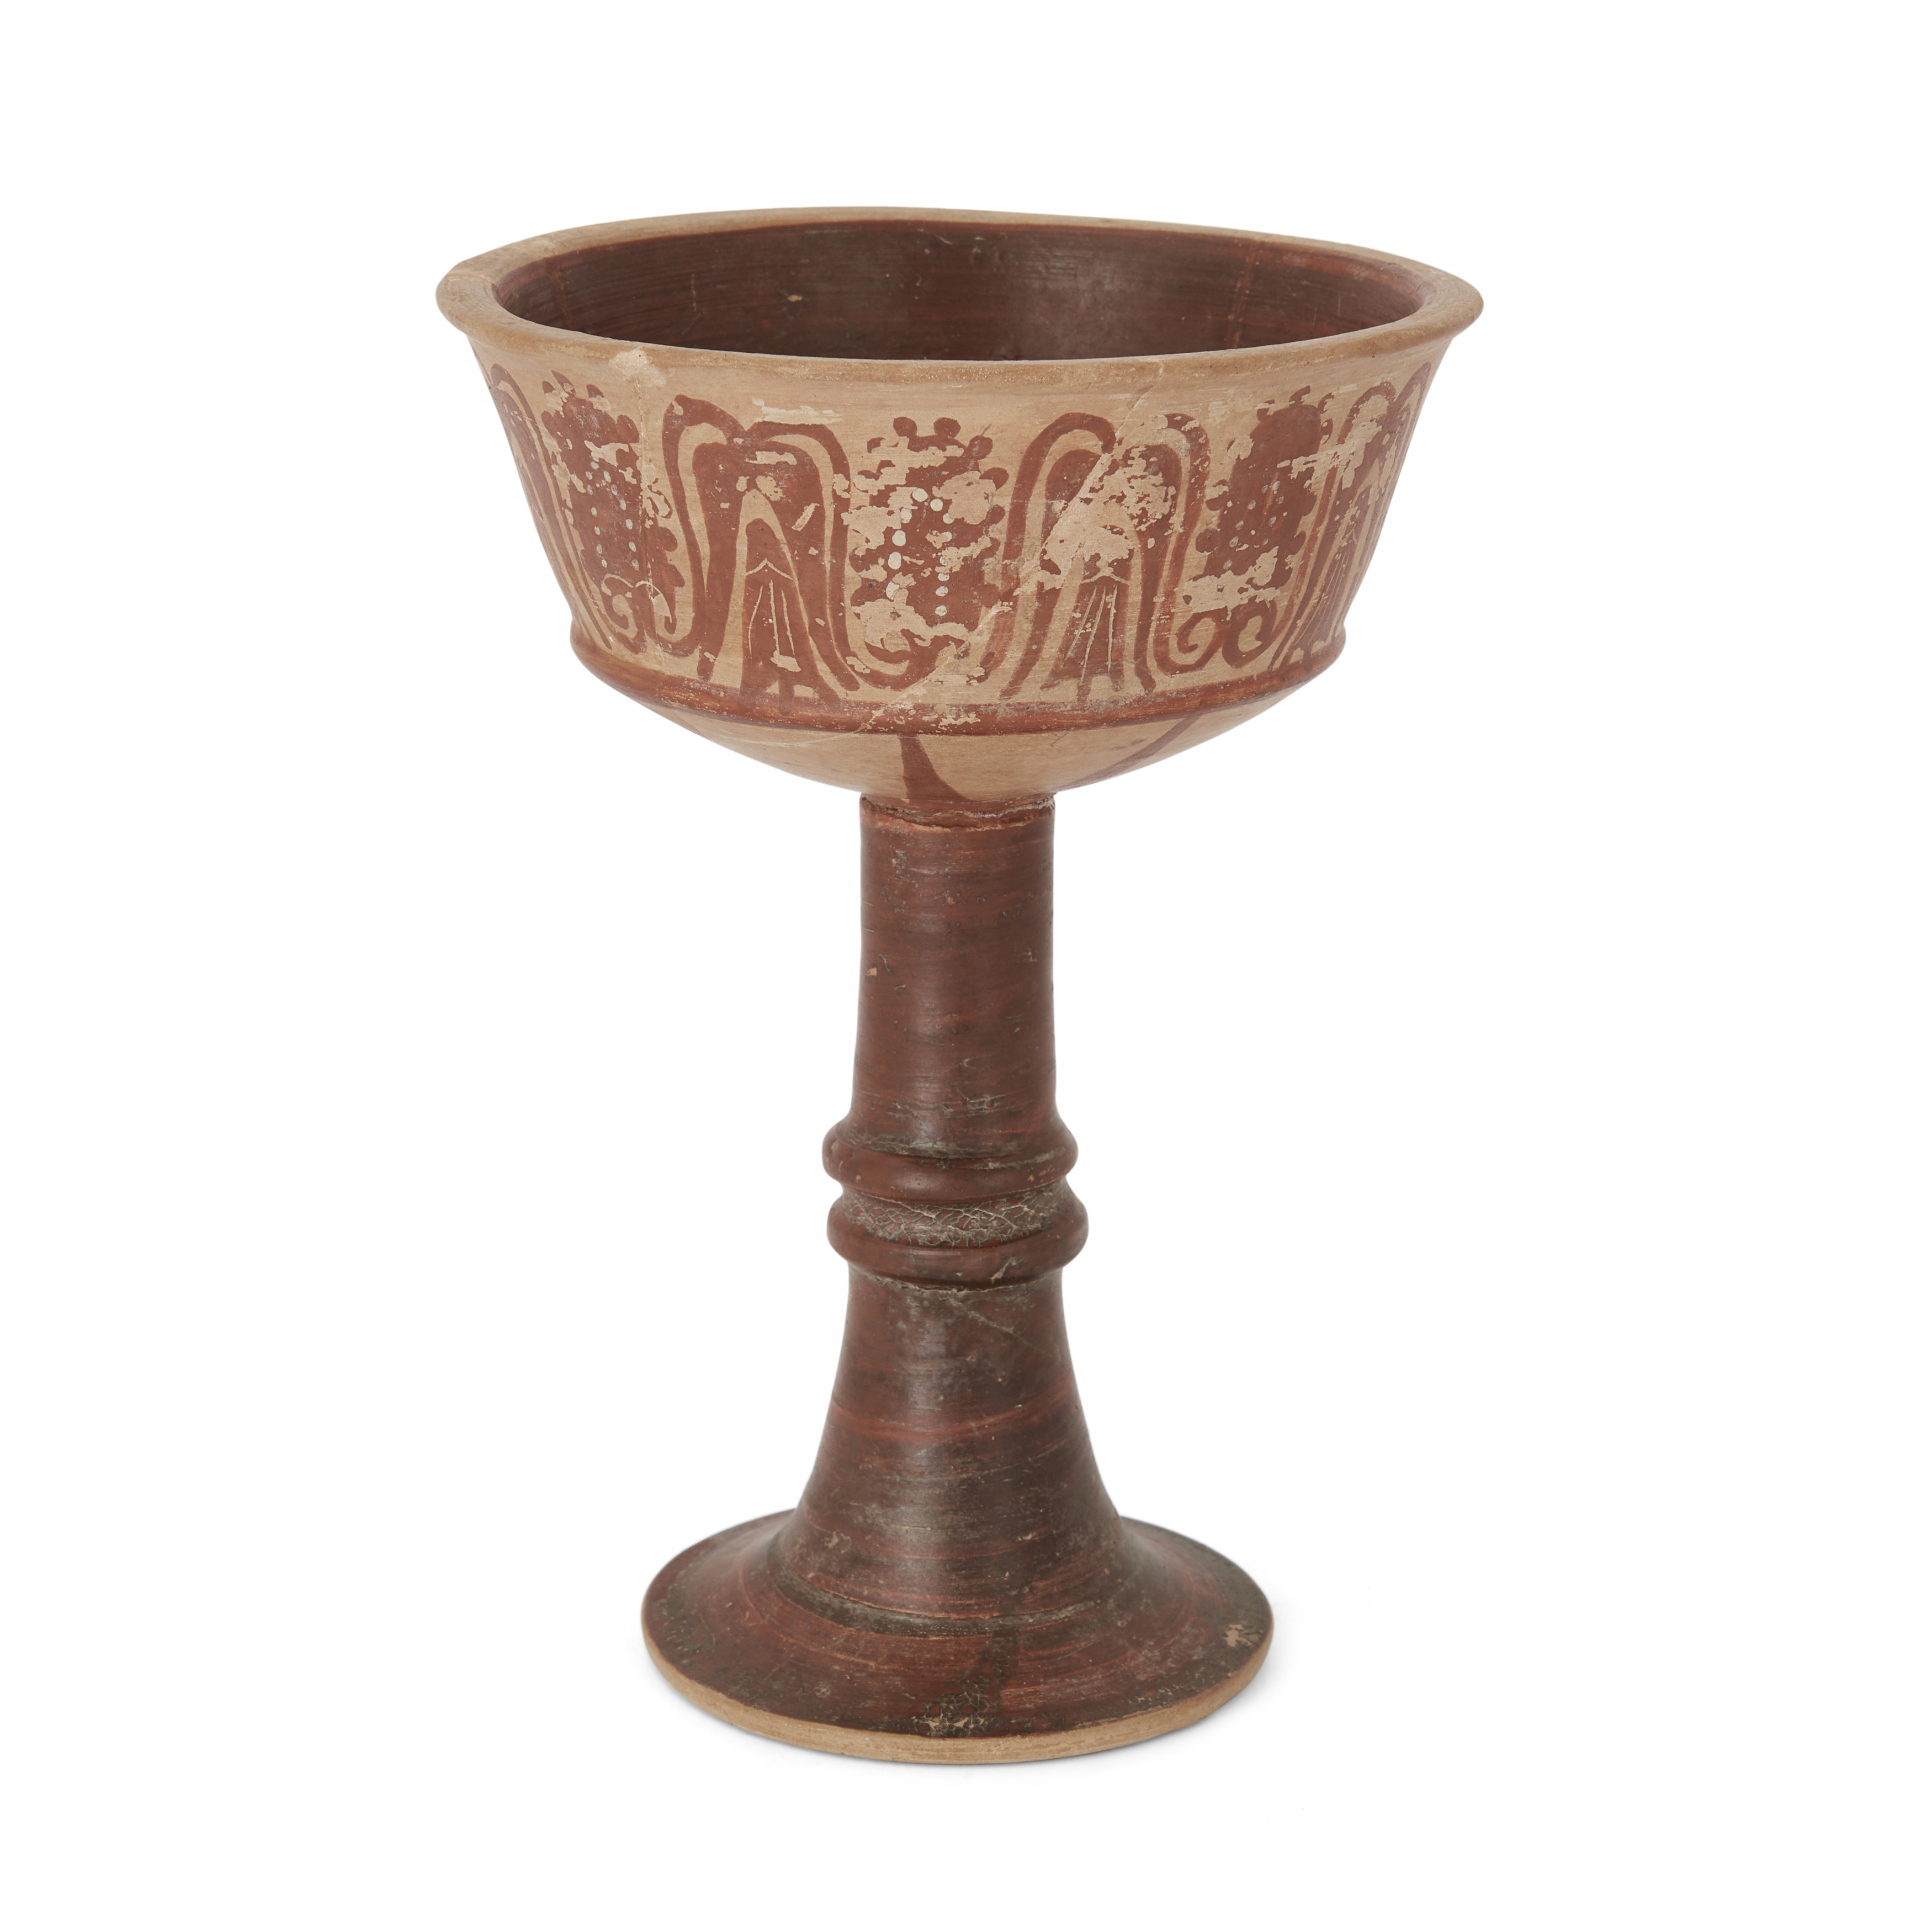 A black-figure pottery chalice, Etruscan (so-called "Pontic"), Attributed to a follower of the P... - Image 2 of 2